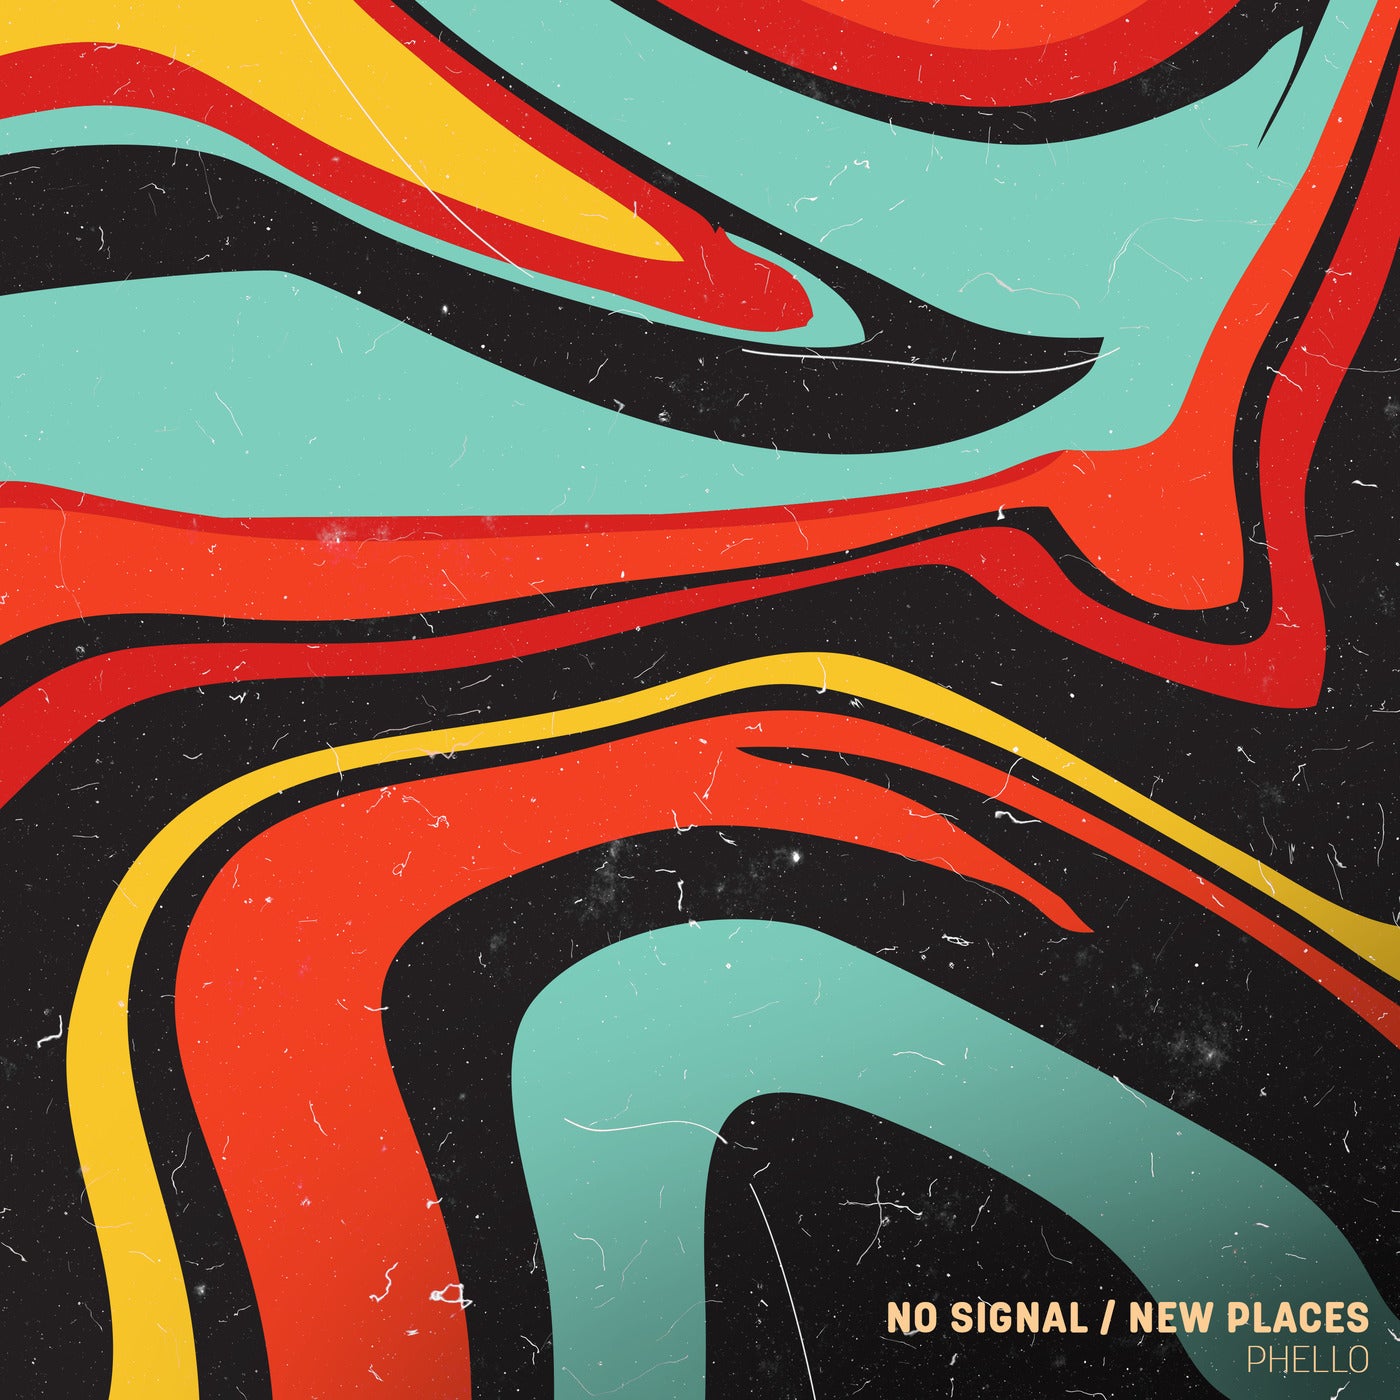 No Signal / New Places